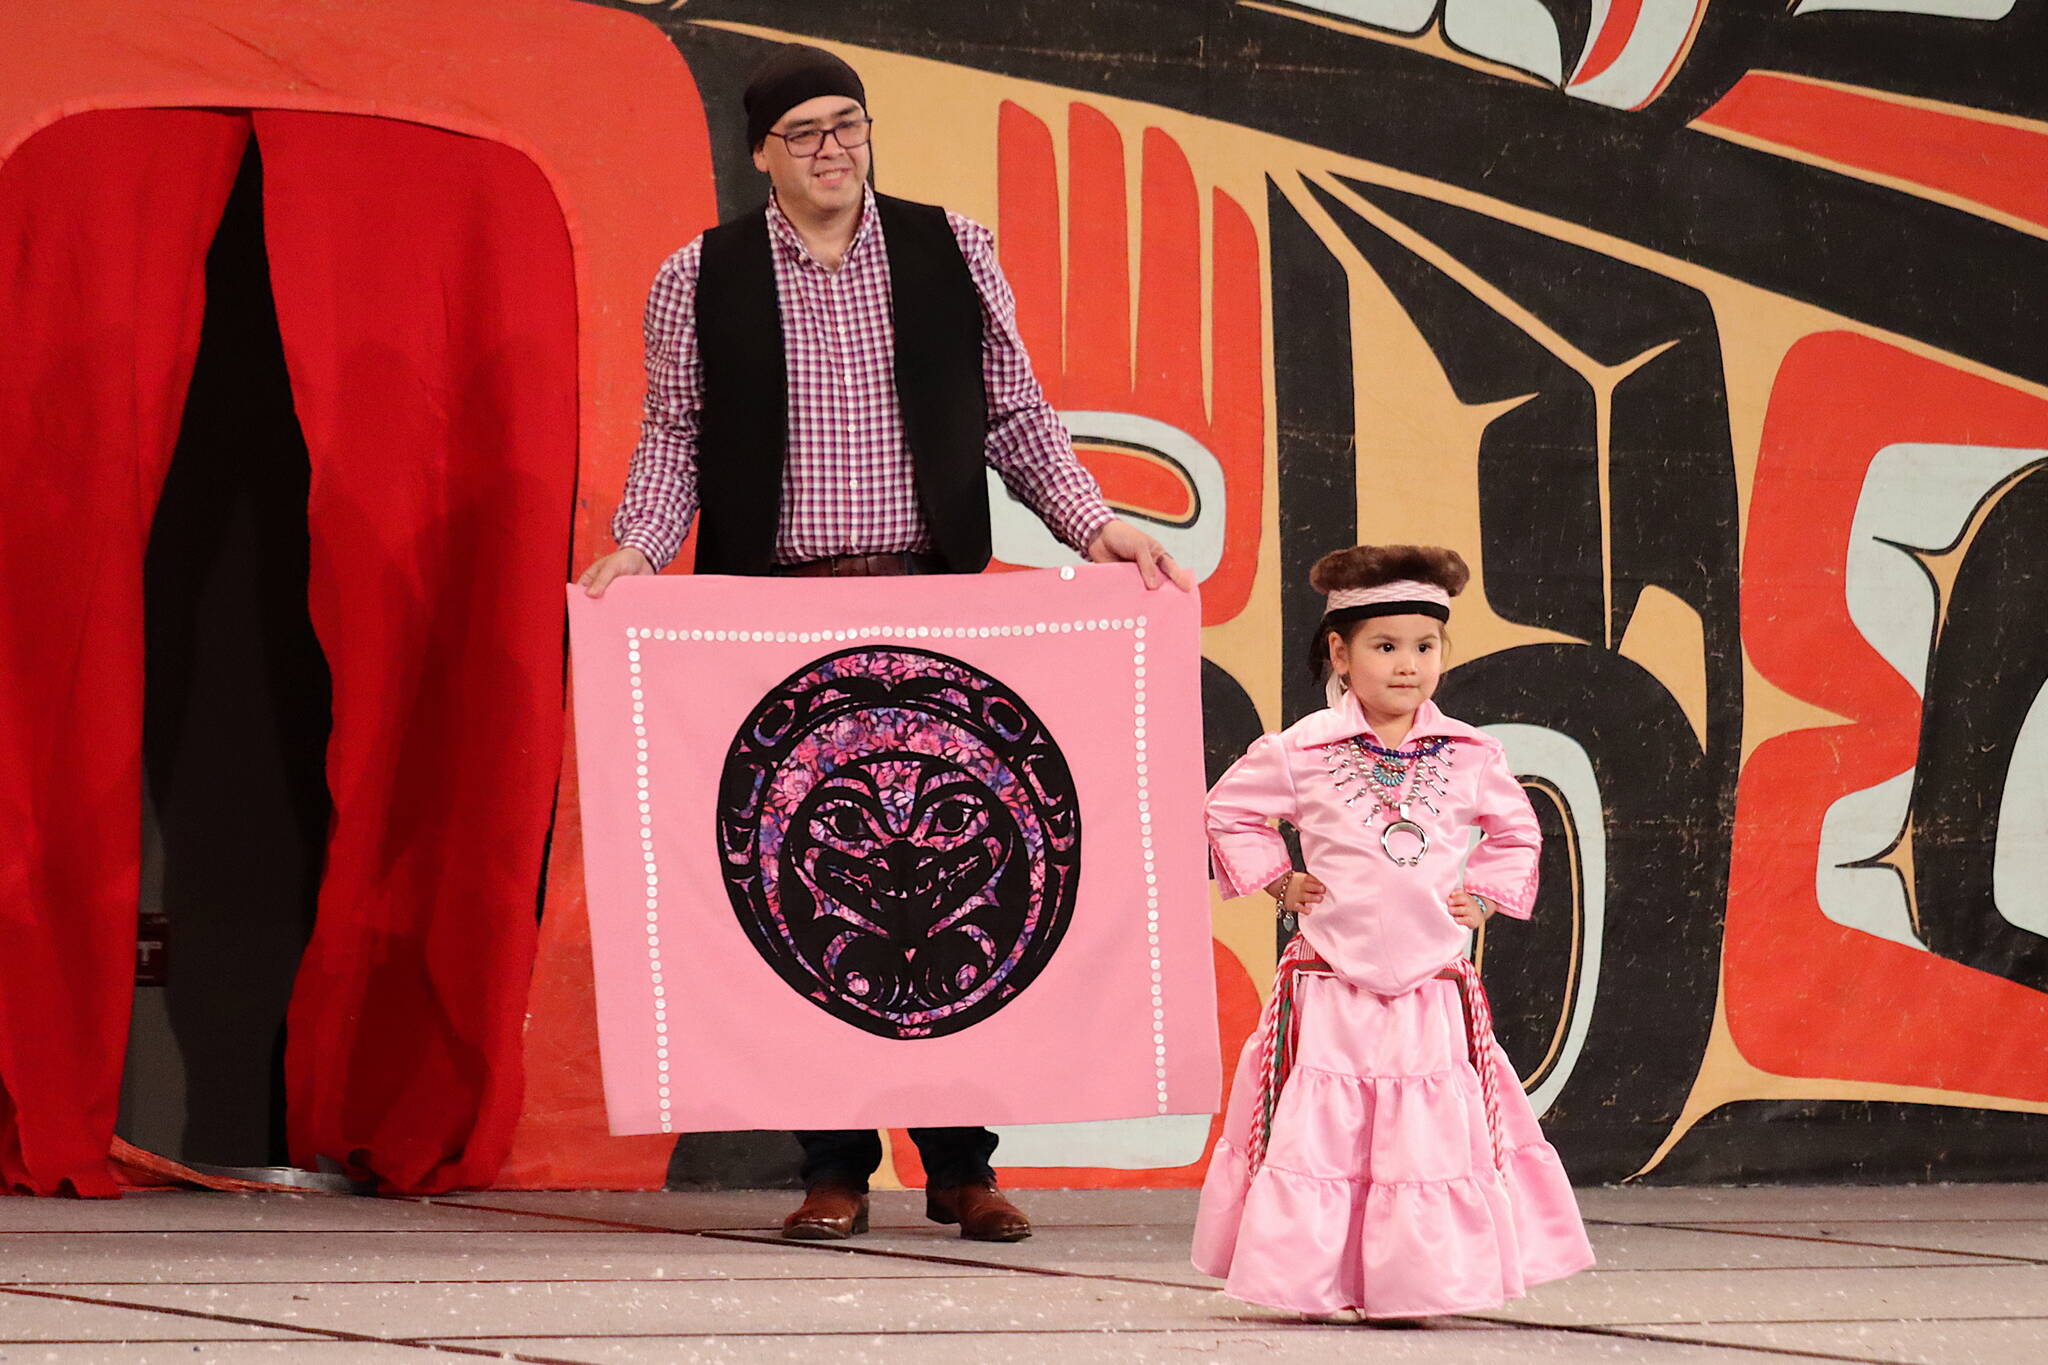 Elizabeth Peele, 3, a Saxton resident, is accompanied by her father Charles during the toddler regalia review as part of Celebration on Thursday at Centennial Hall. (Mark Sabbatini / Juneau Empire)